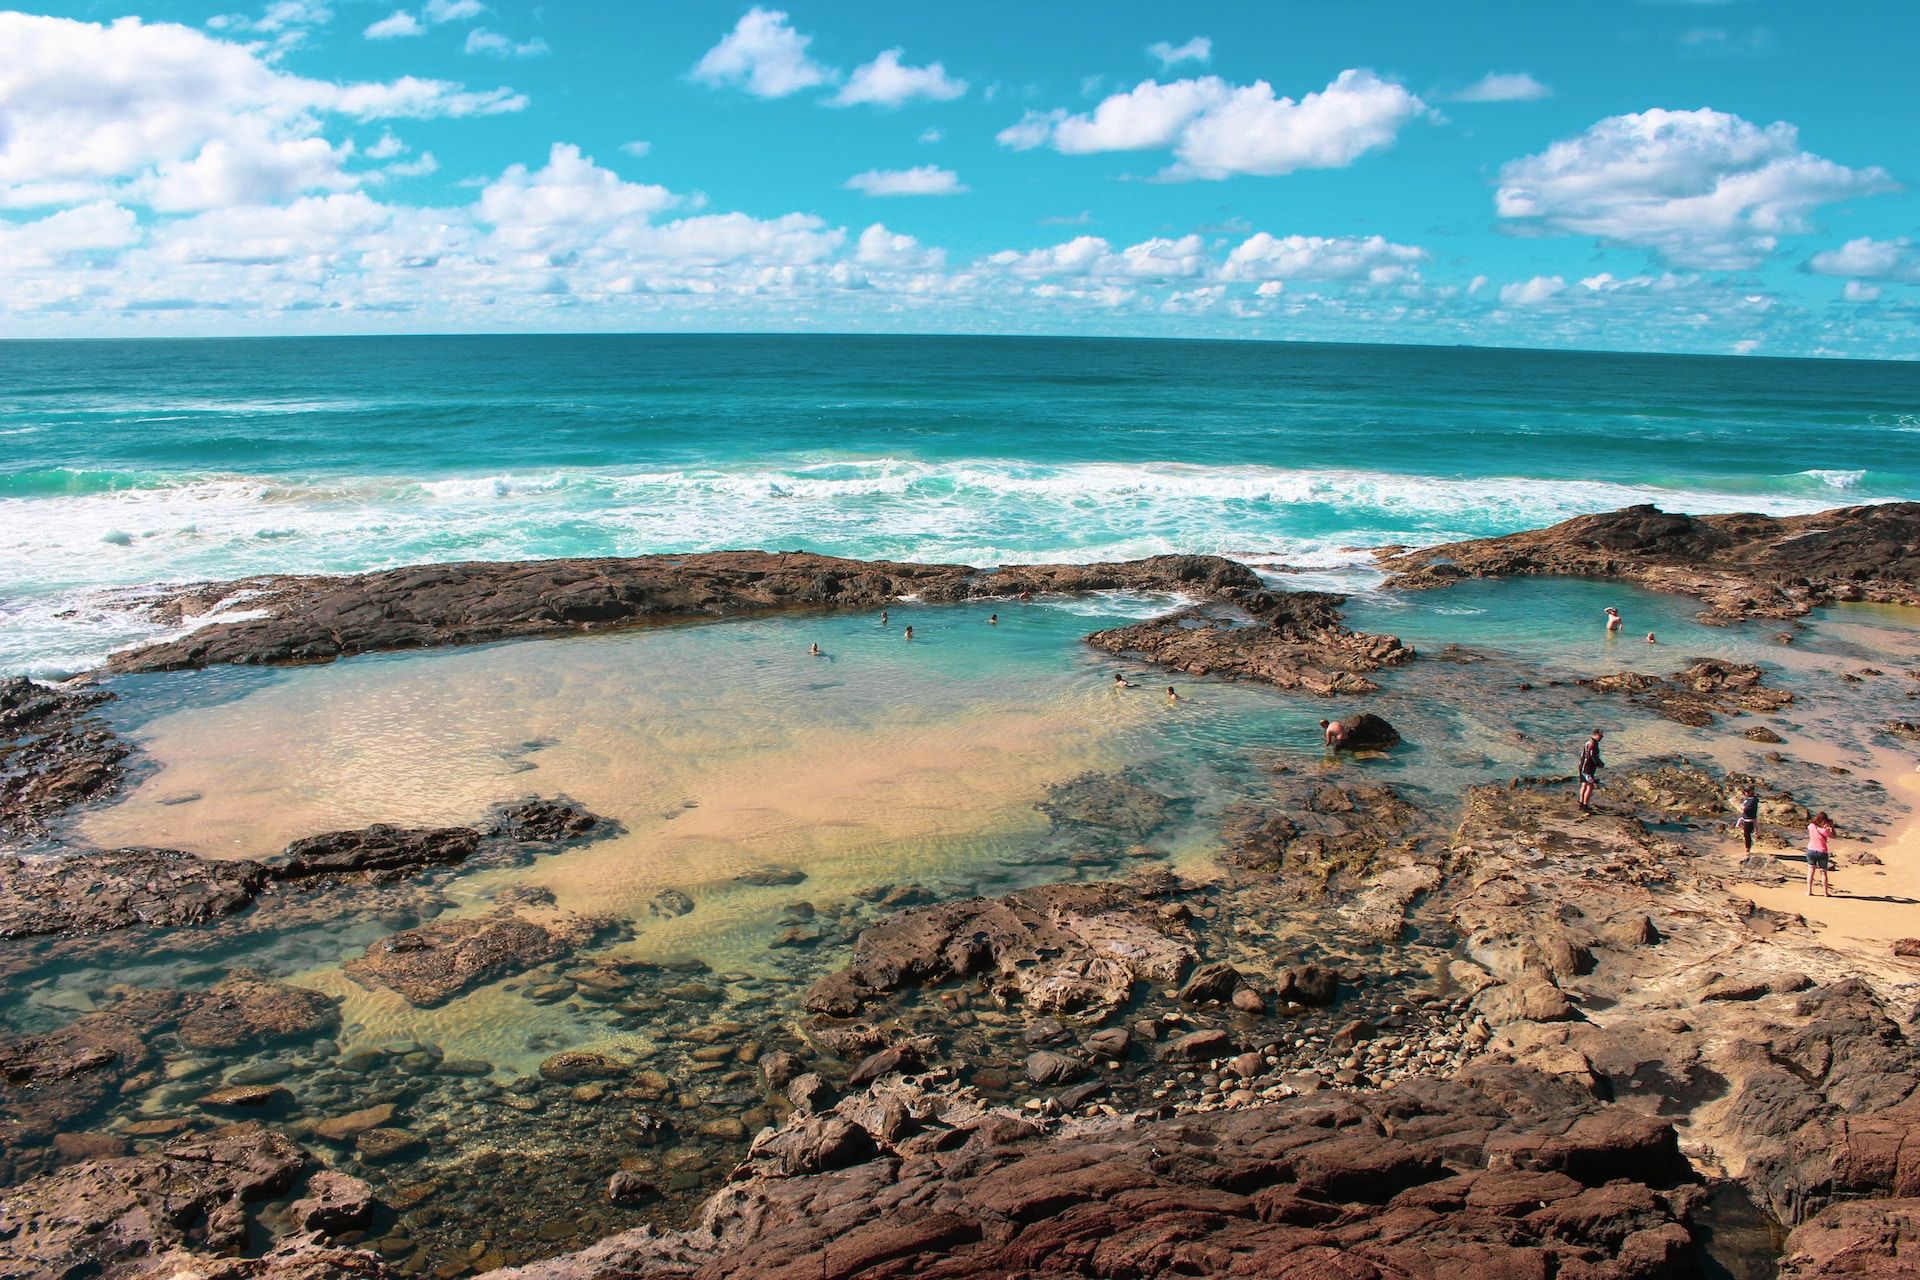 Visitors enjoying the sunny, warm weather by swimming in the Champagne Pools of Fraser Island, Australia